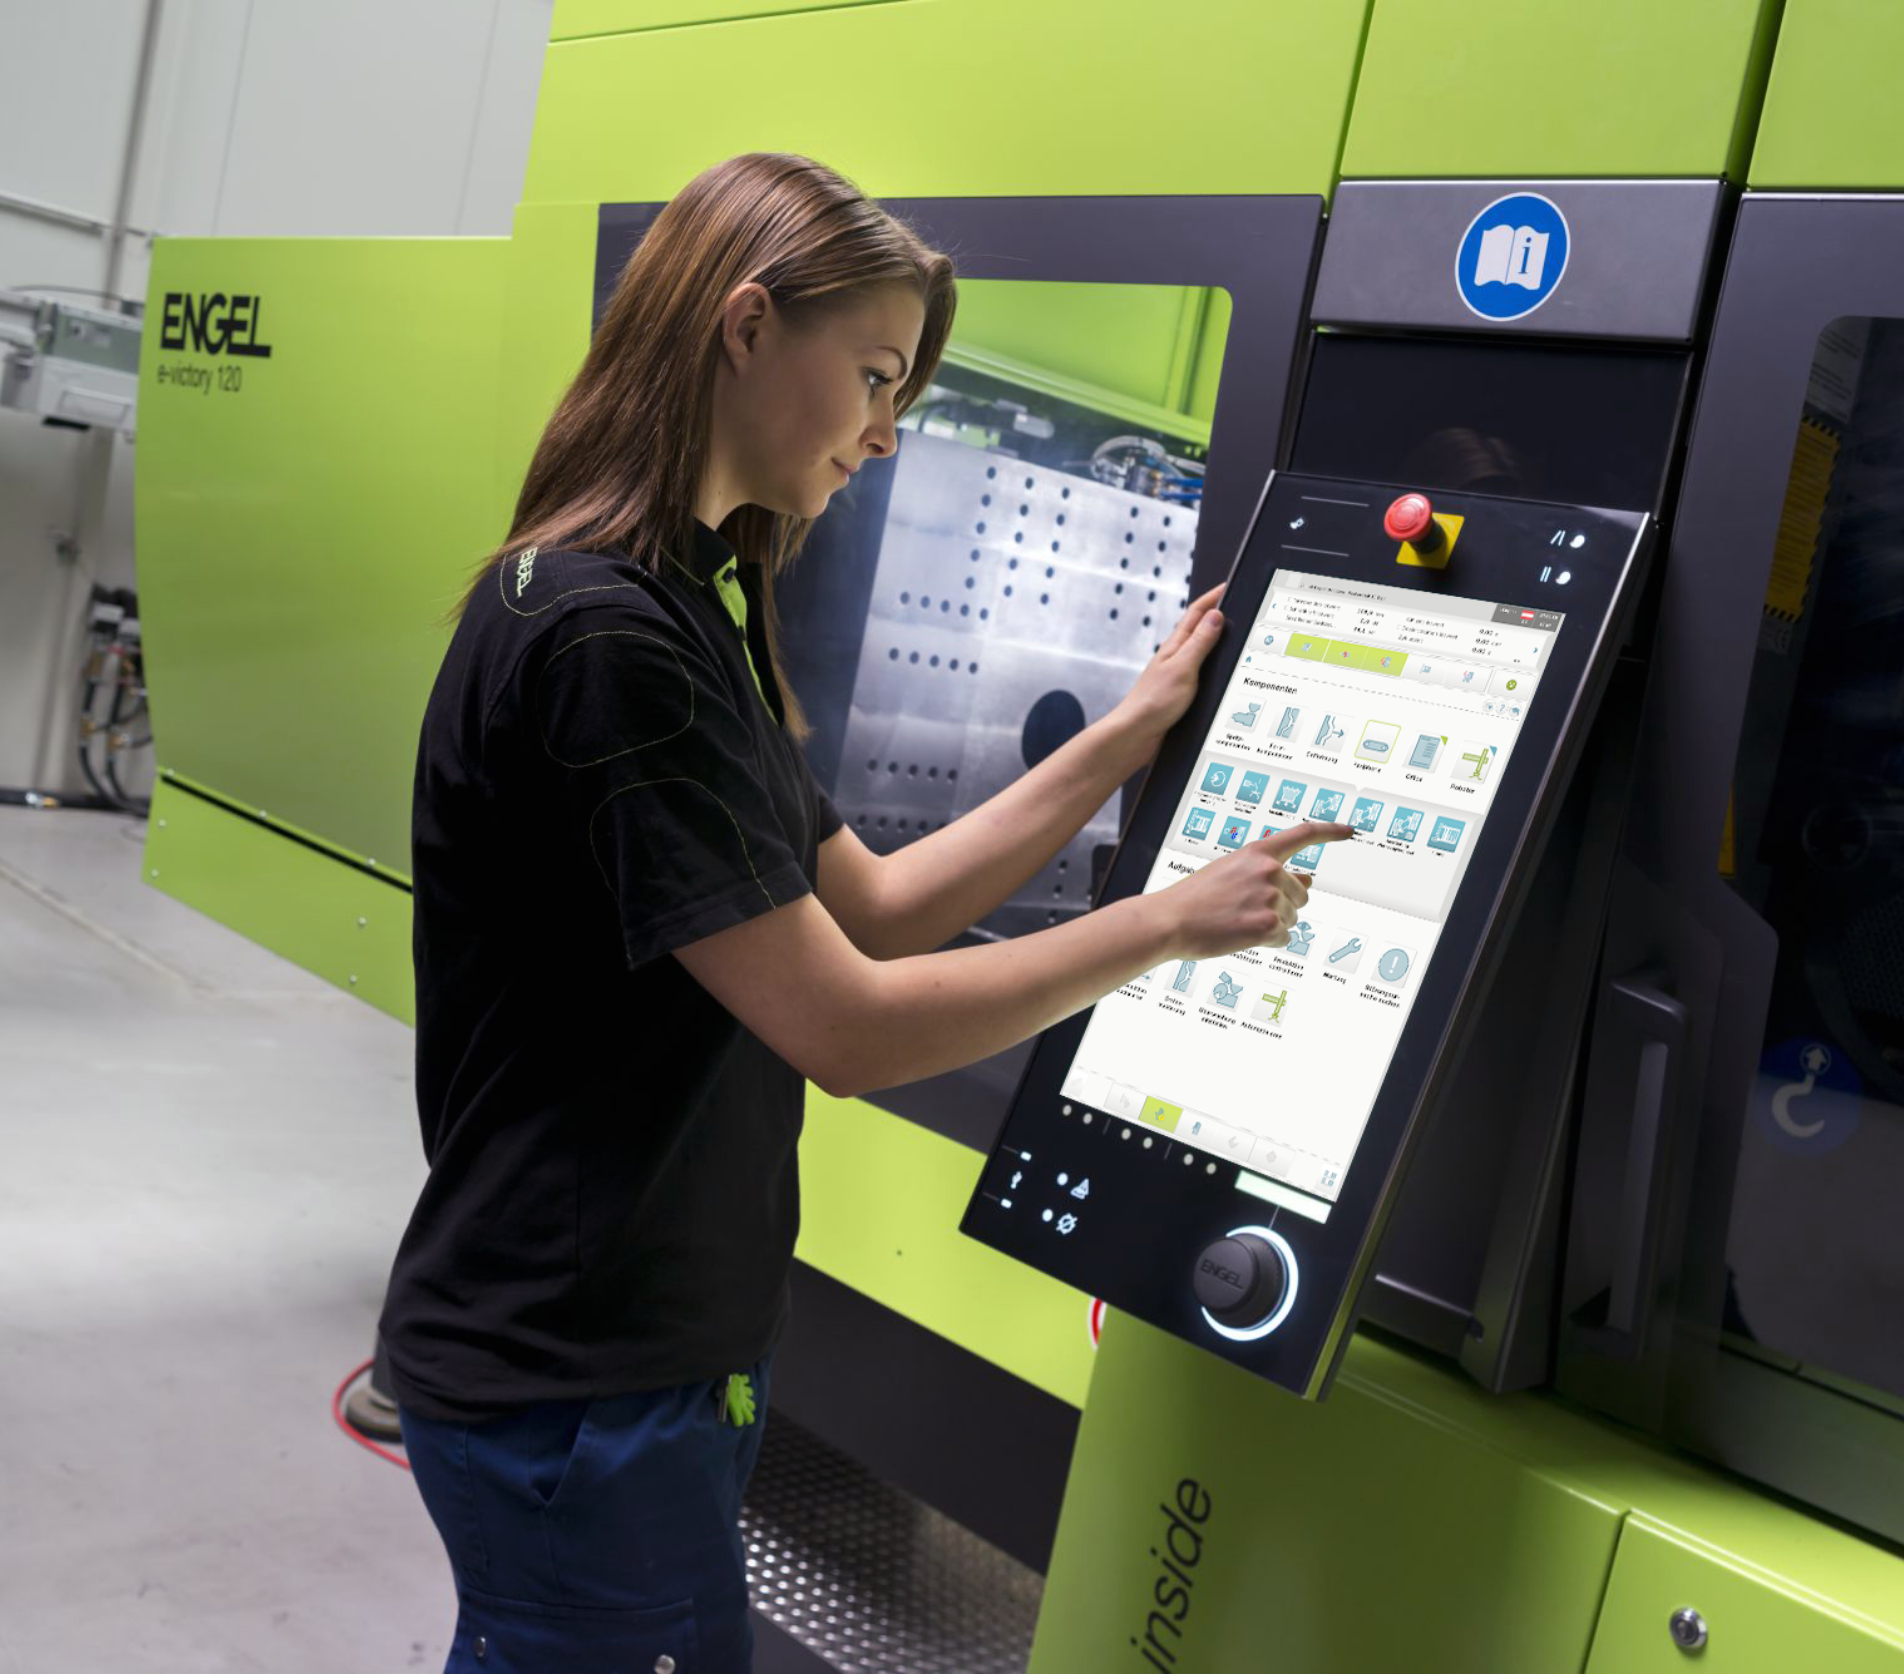 engel touchscreen with female operator | industrial design in Vienna